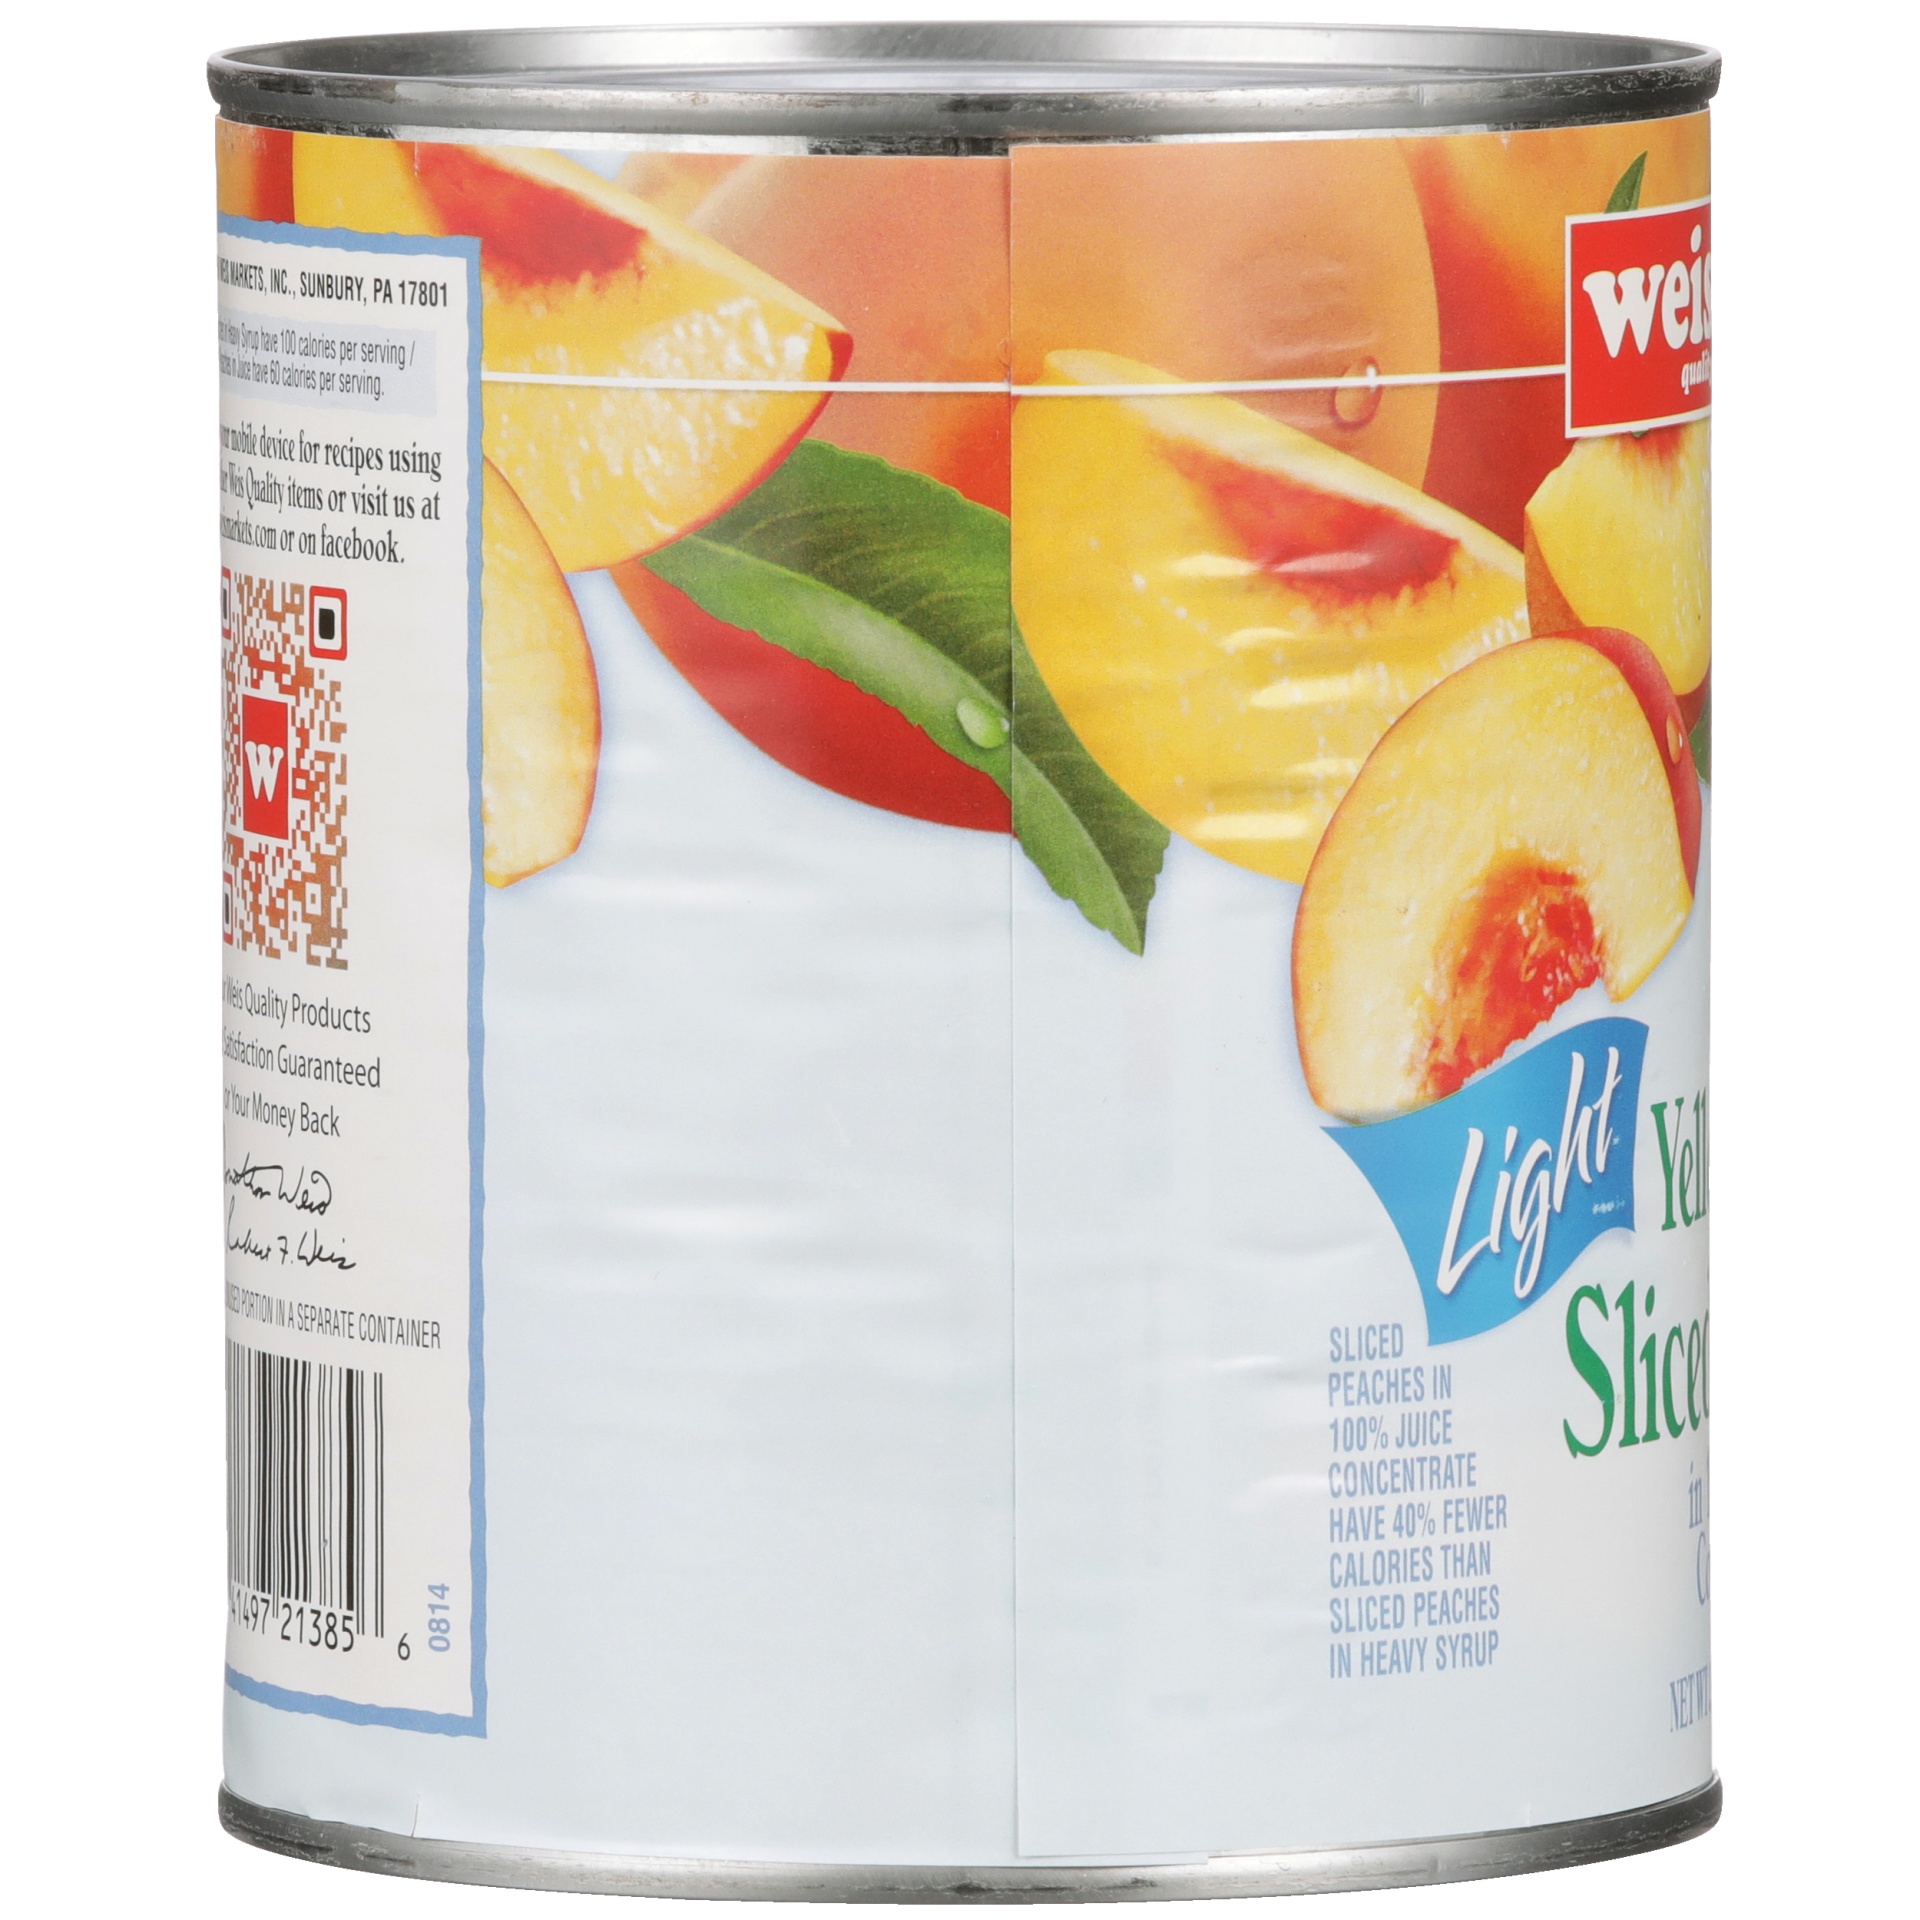 slide 4 of 6, Weis Quality Yellow Cling Sliced Peaches in 100% Juice Canned Fruit, 29 oz